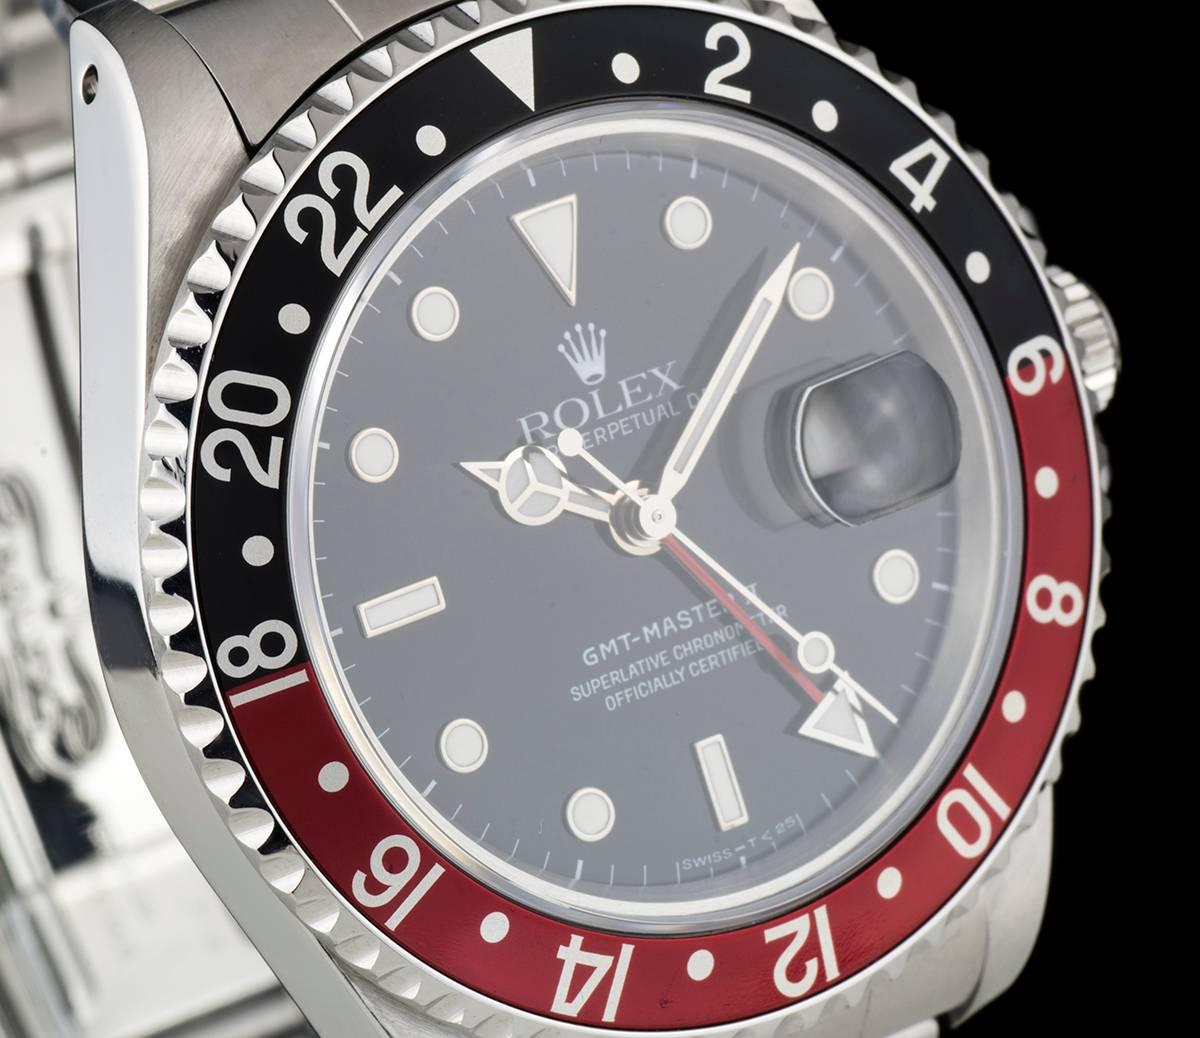 A Stainless Steel Oyster Perpetual GMT-Master II Gents Wristwatch, black dial with applied hour markers, date at 3 0'clock, red GMT hand, a stainless steel bi-directional rotating bezel with a black and red "coke" bezel insert, a stainless